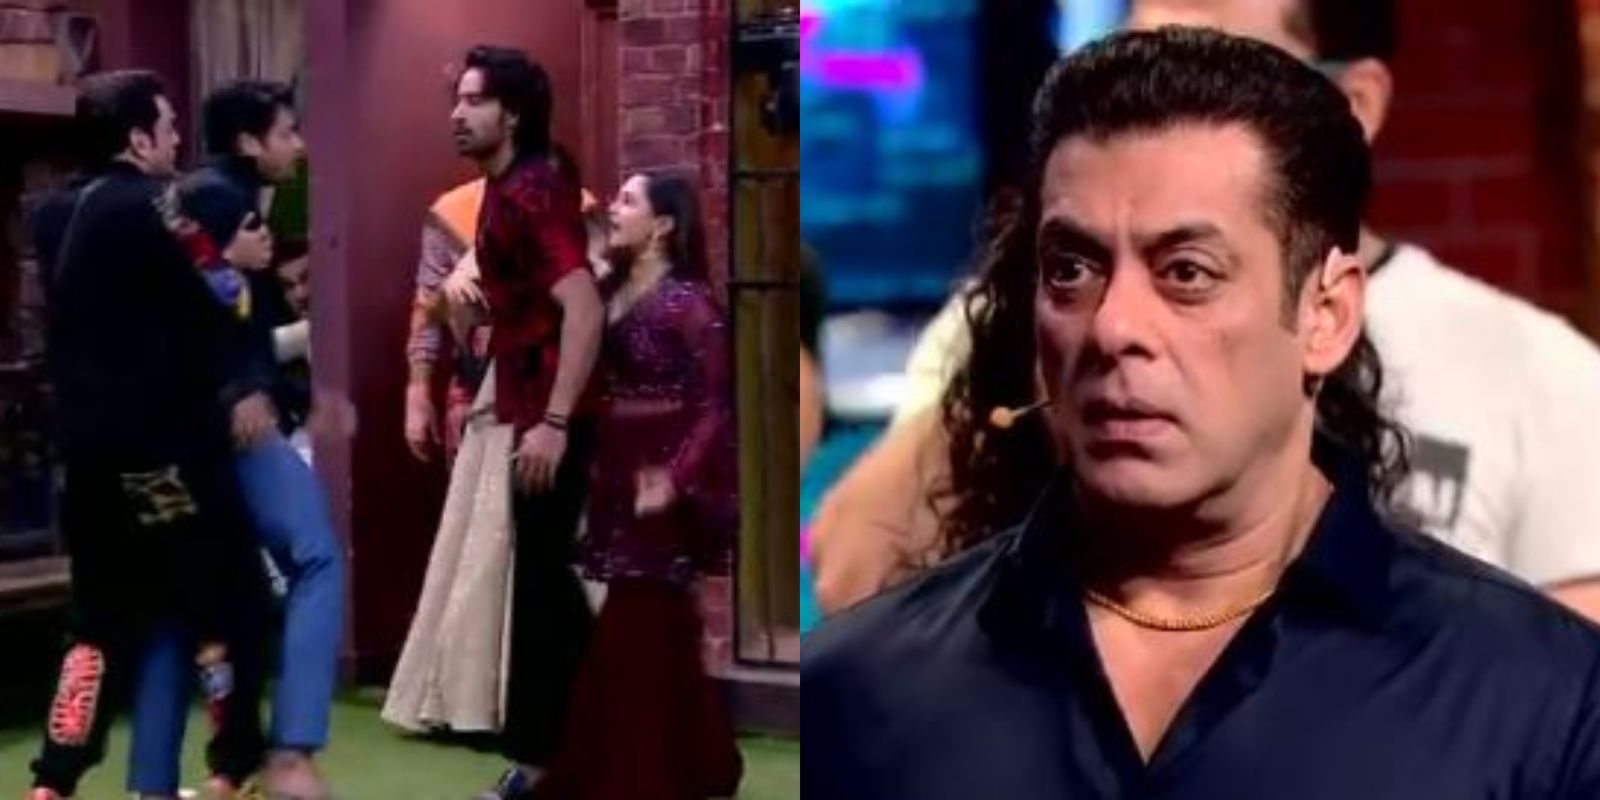 Bigg Boss 13: Salman Khan Loses His Cool After Siddharth-Rashami's Fight, Tells Makers To Find A New Host